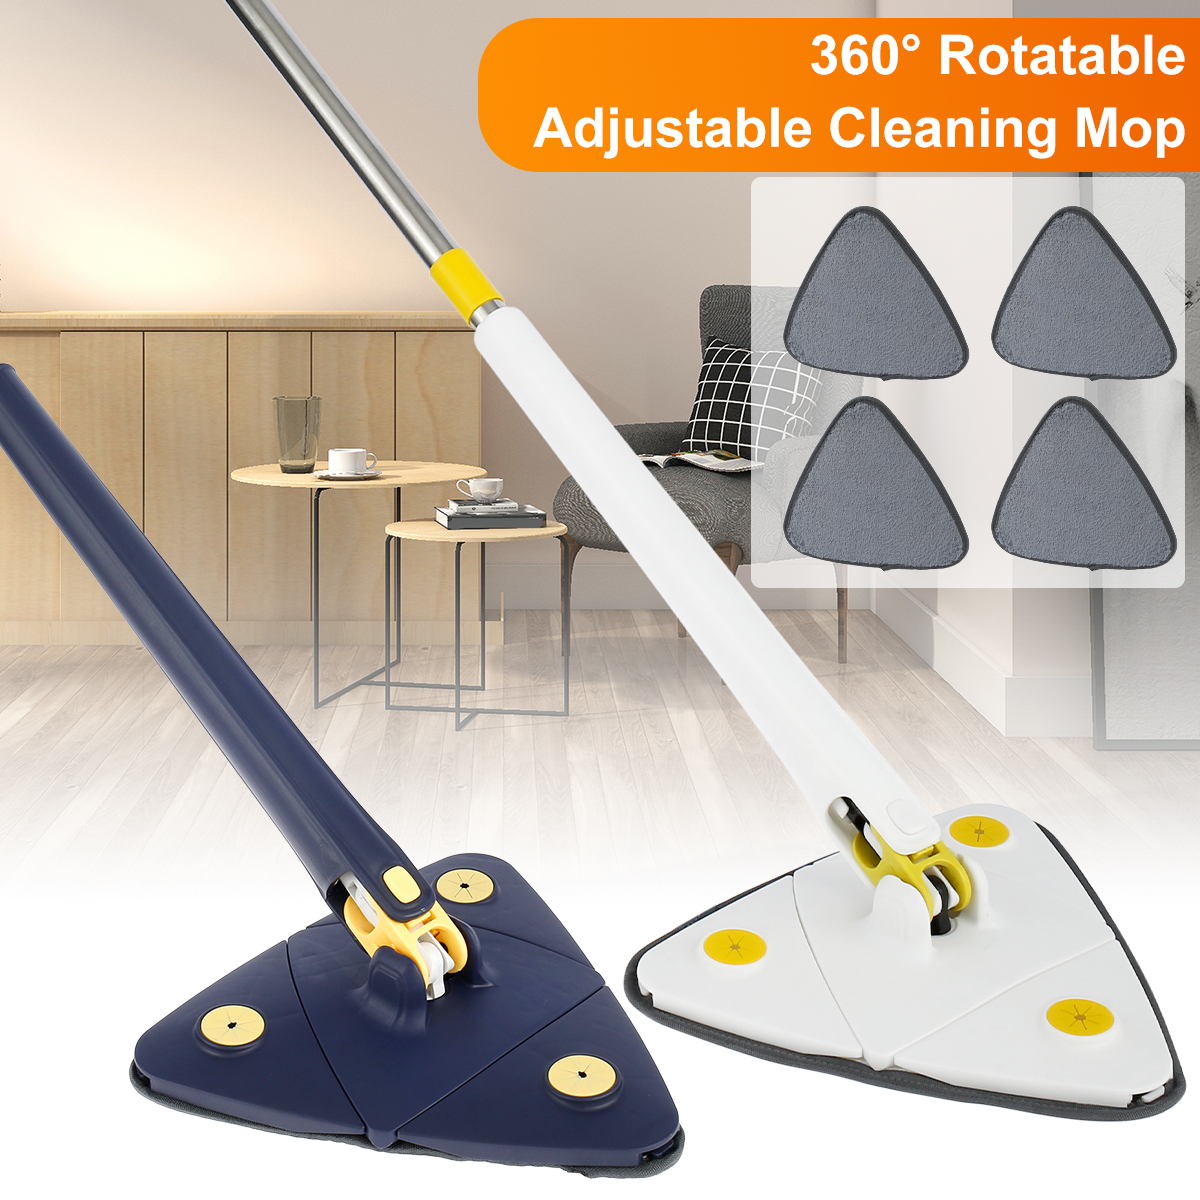 Cleaning Mop 360° Rotatable Adjustable Cleaning Mop Push-Pull Automatic  Squeezing Mop Long Handle Flat Mop Microfiber Floor - AliExpress